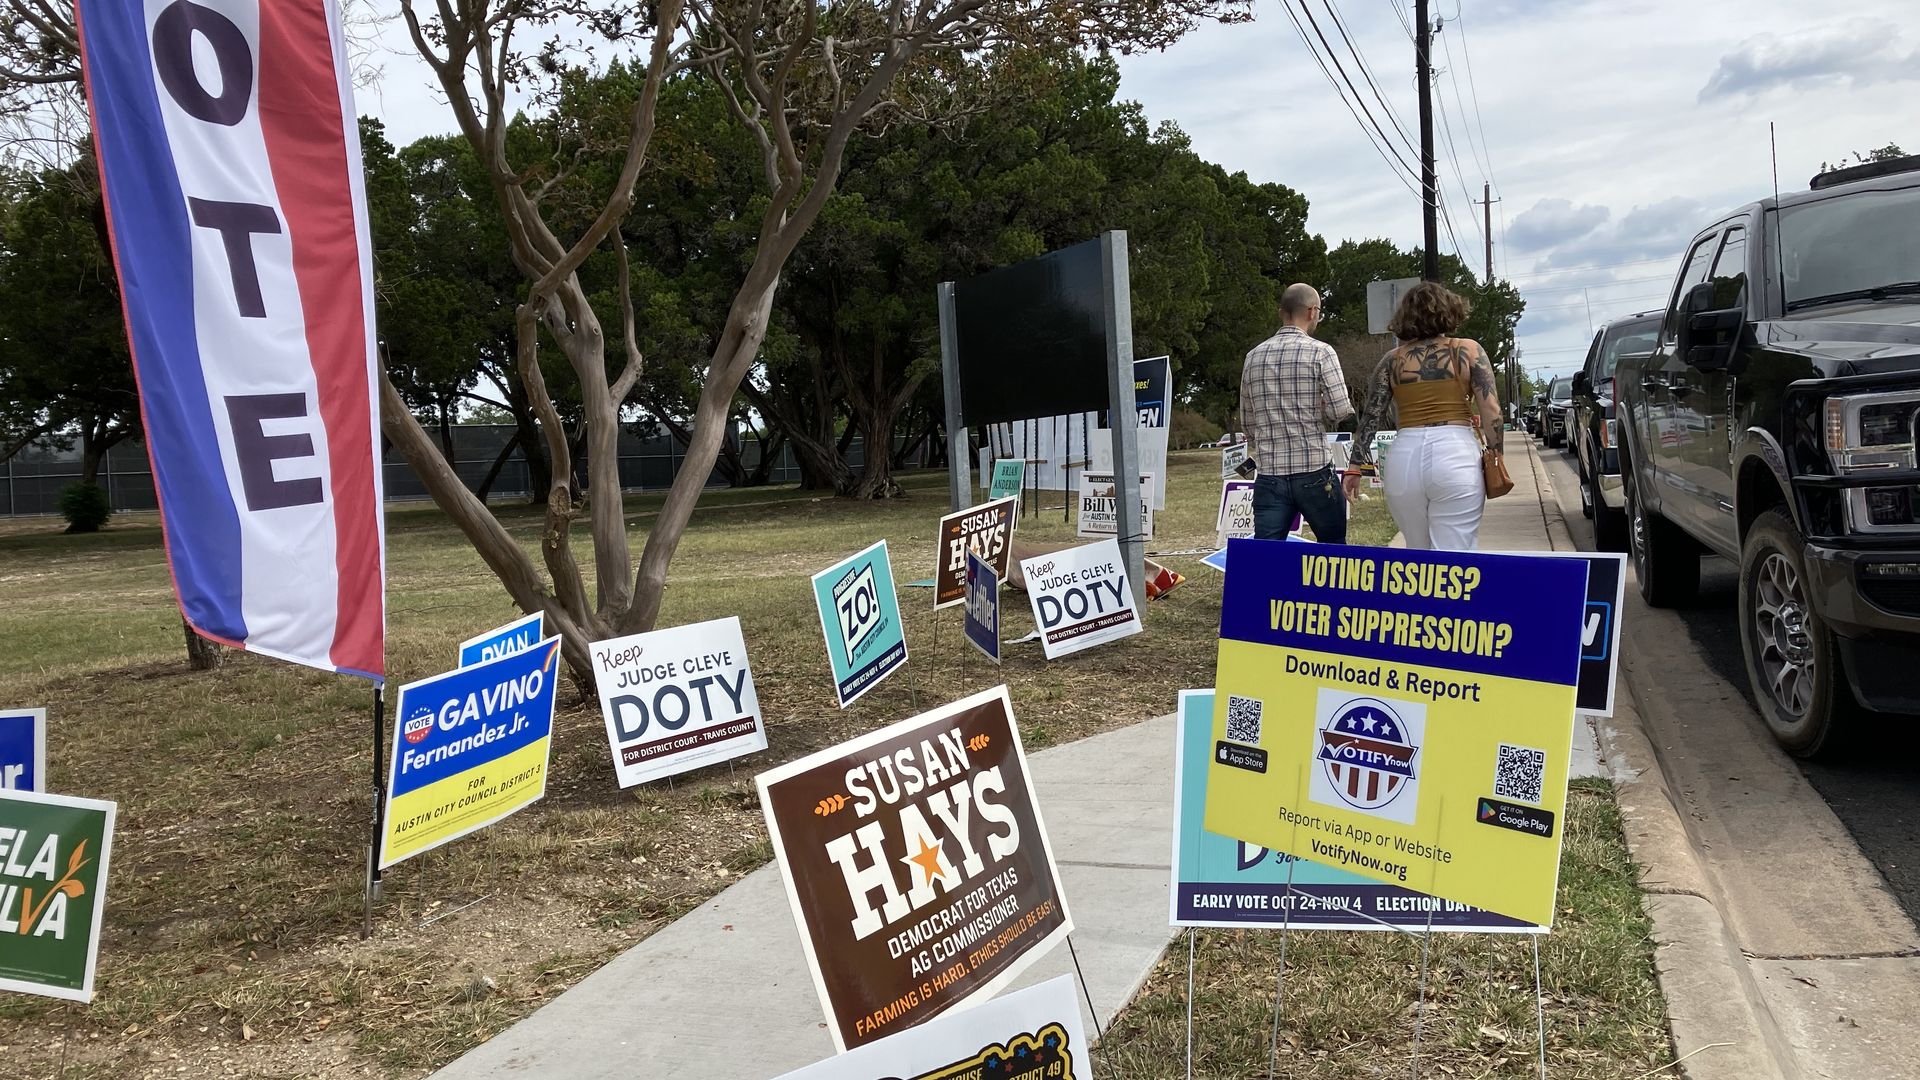 Signs about how to report voter suppression and candidate placards share space outside a South Austin polling site. Photo: Asher Price/Axios